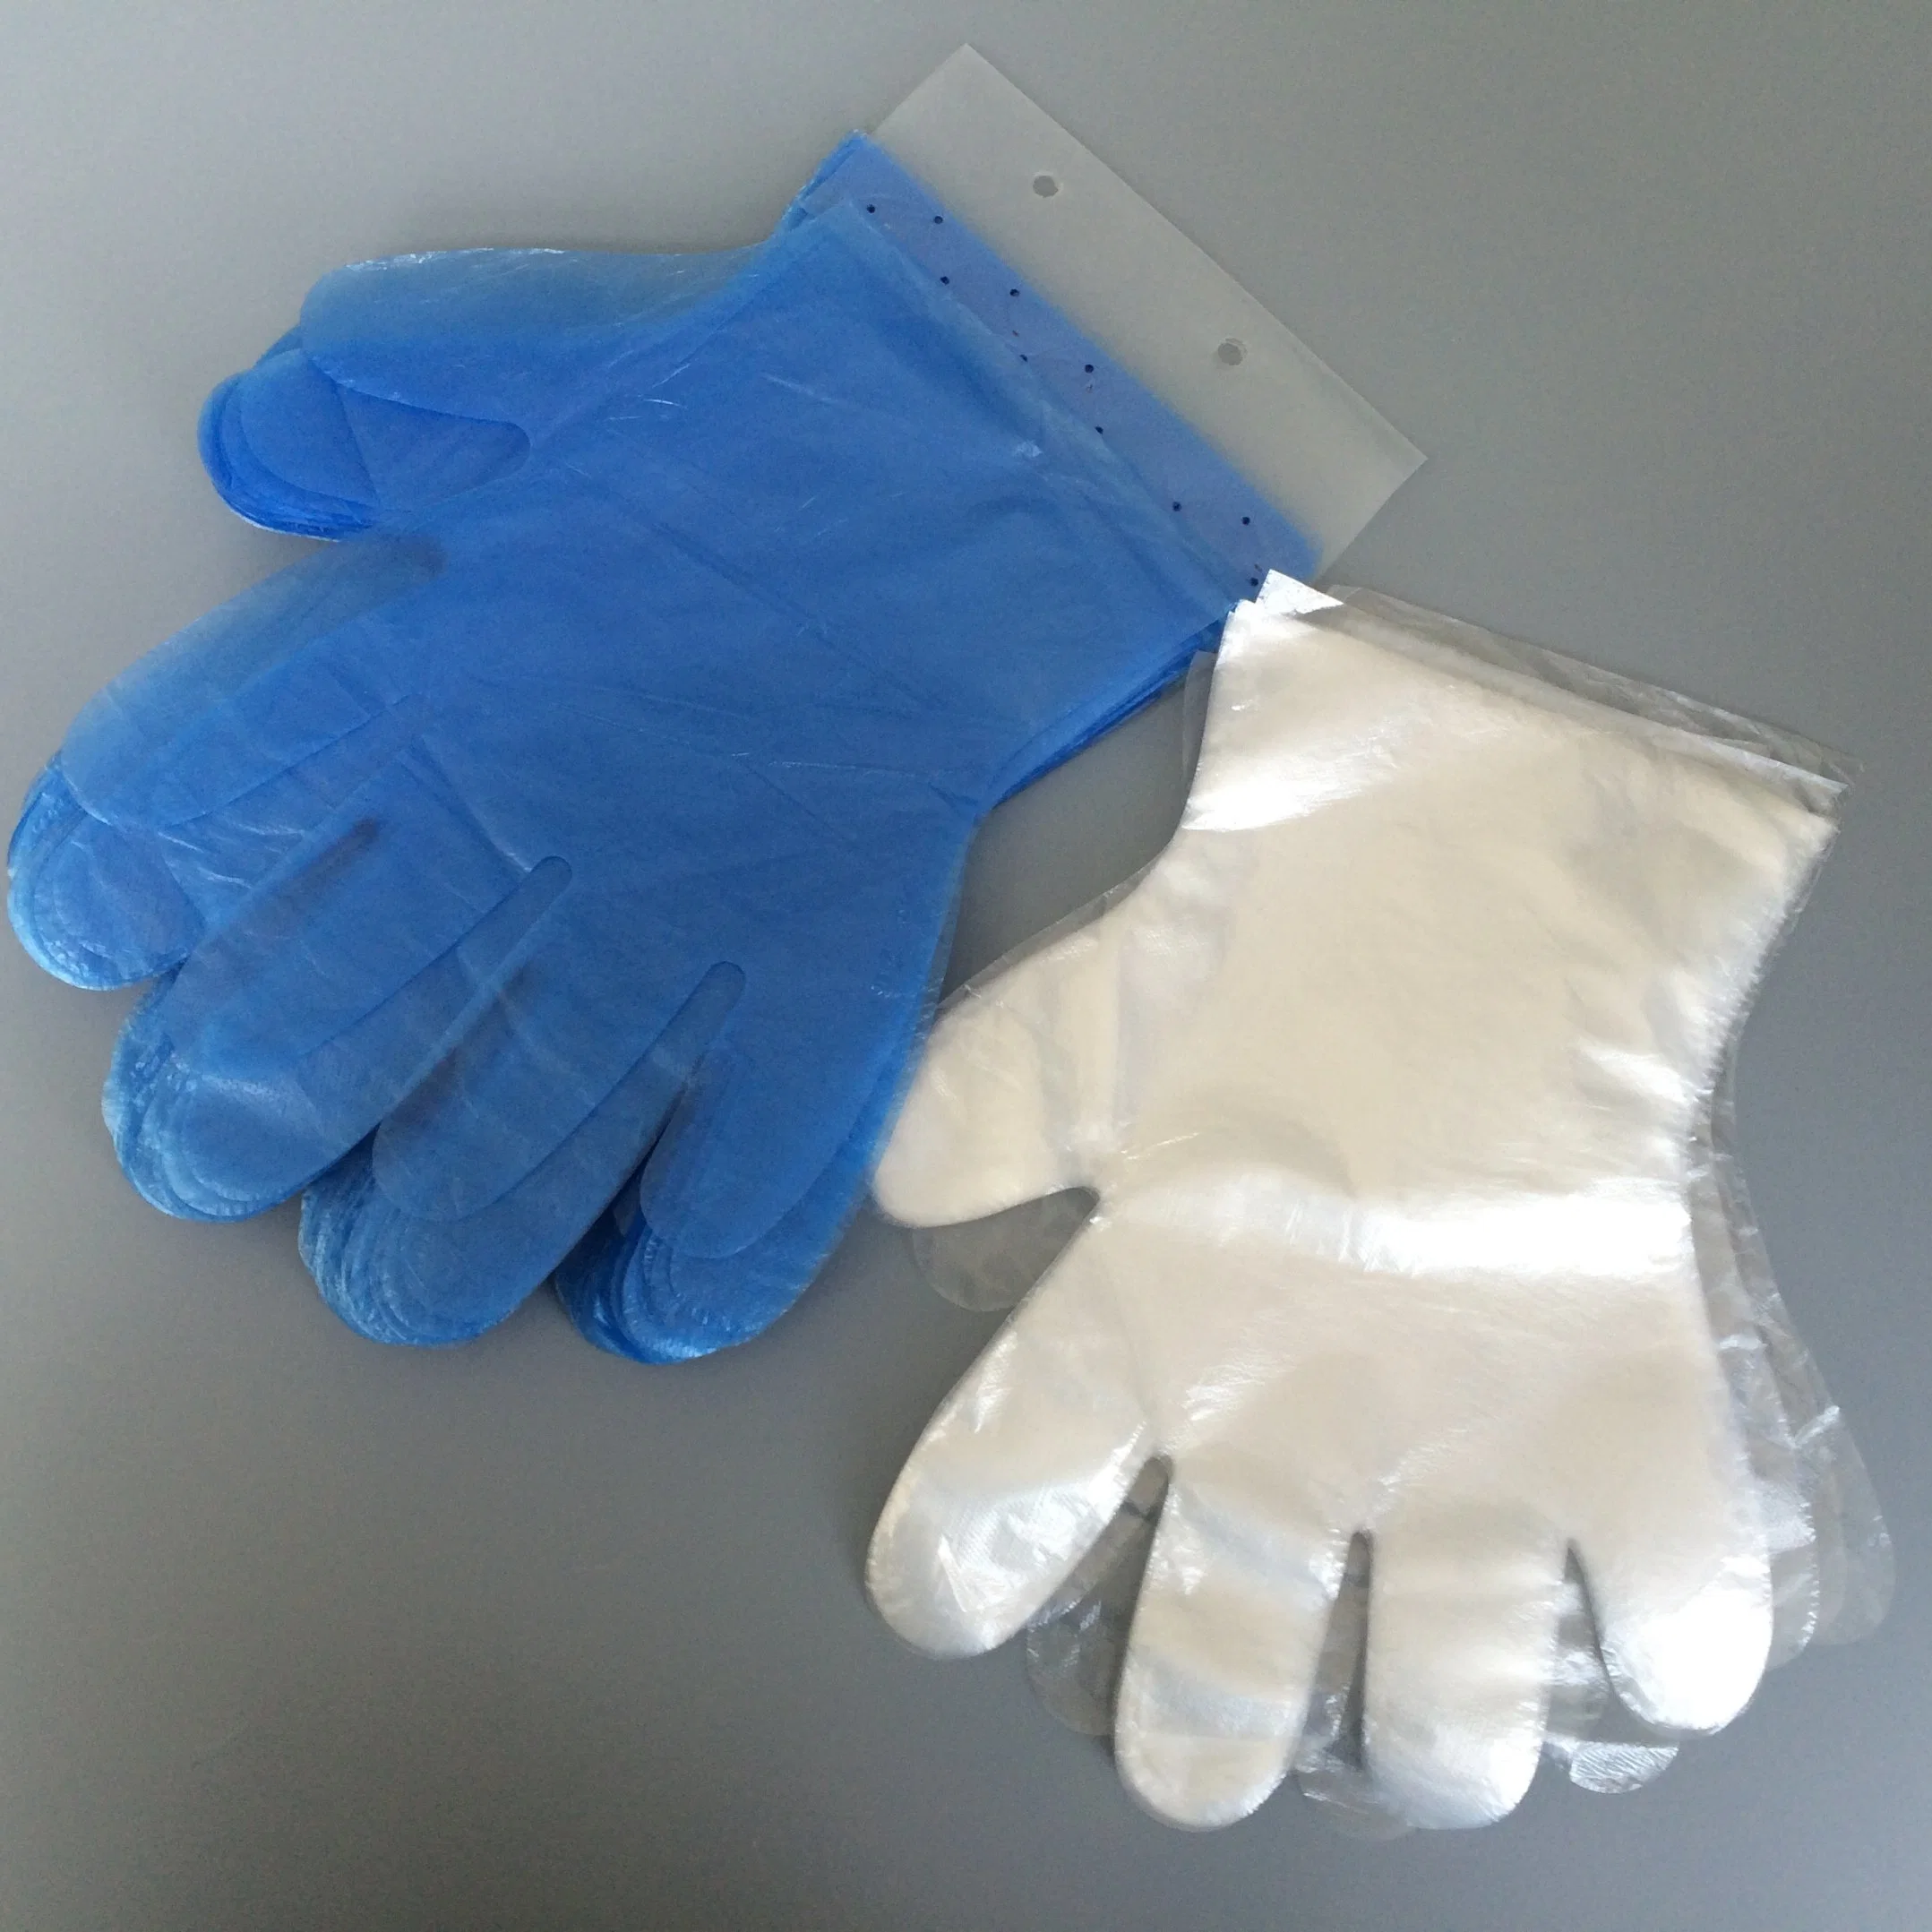 Factory Supply Disposable Food Handling HDPE Gloves with FDA Approved